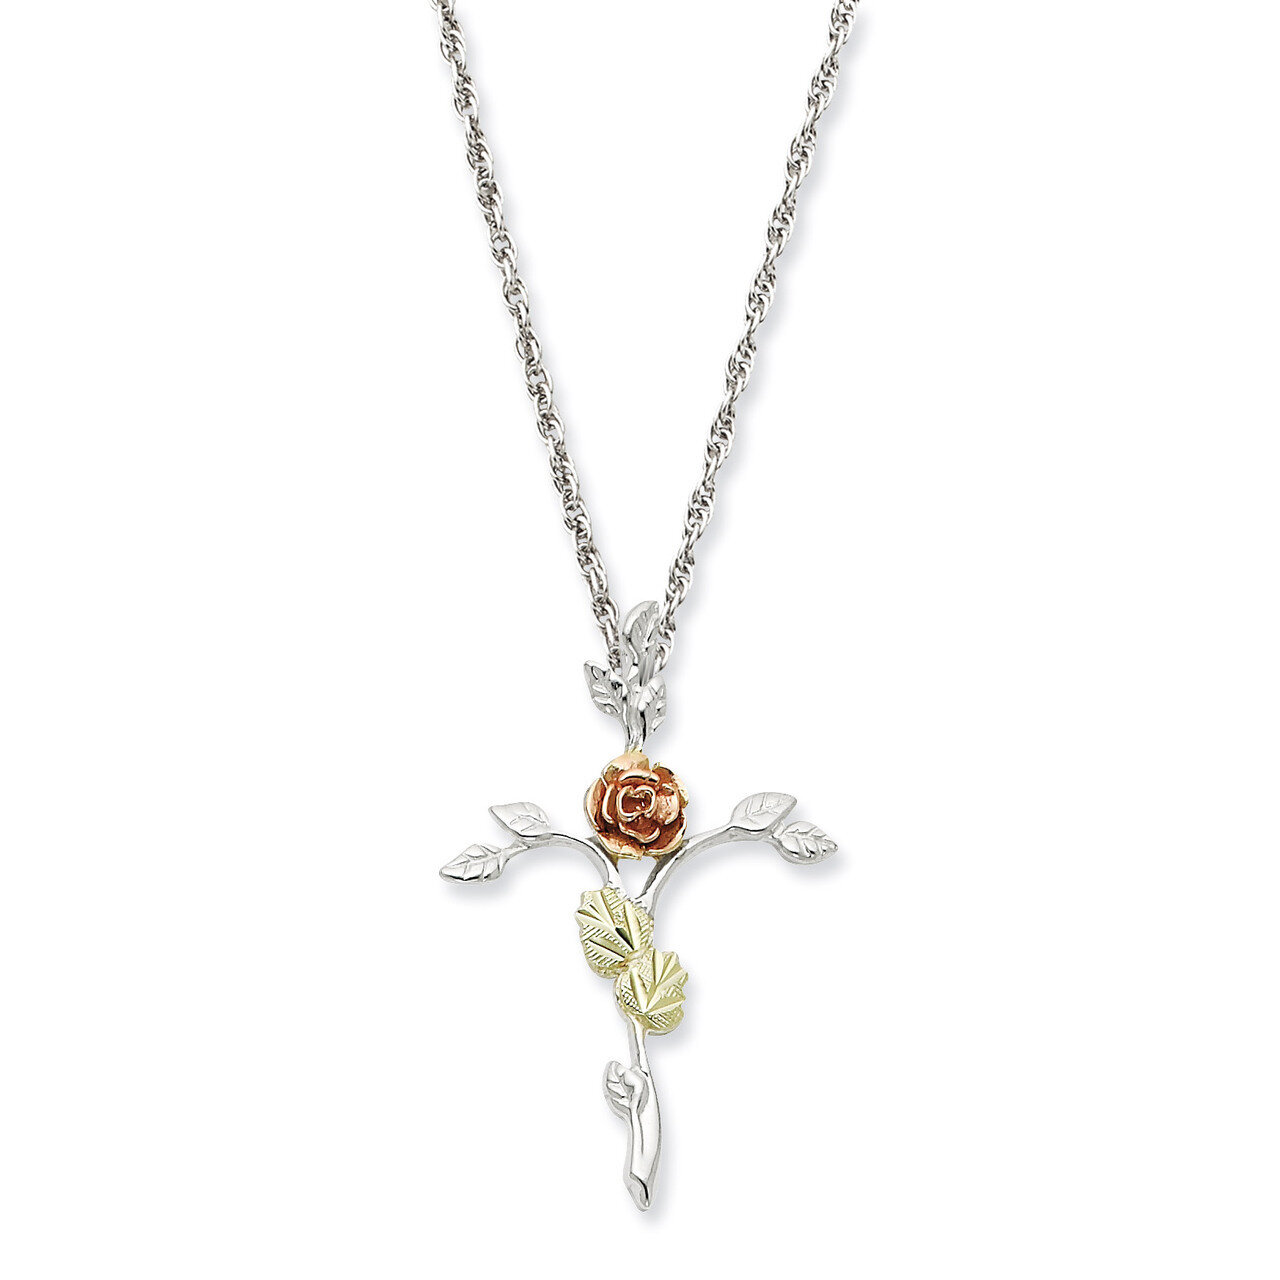 Rose Cross Necklace Sterling Silver & 12k Gold QBH162-18